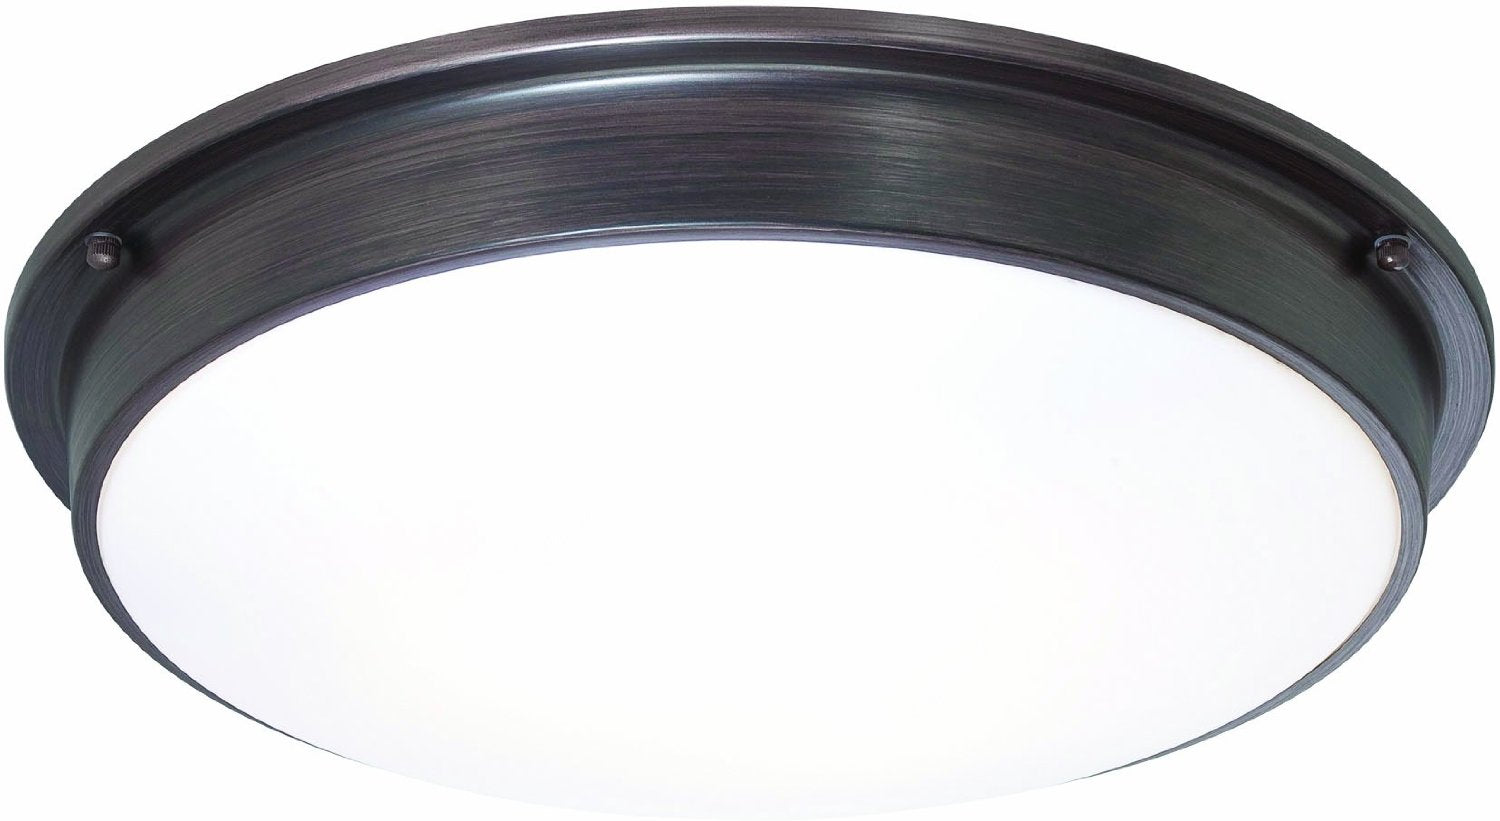 Sylvania 75252 LED Indoor Ceiling Mounted Fixture